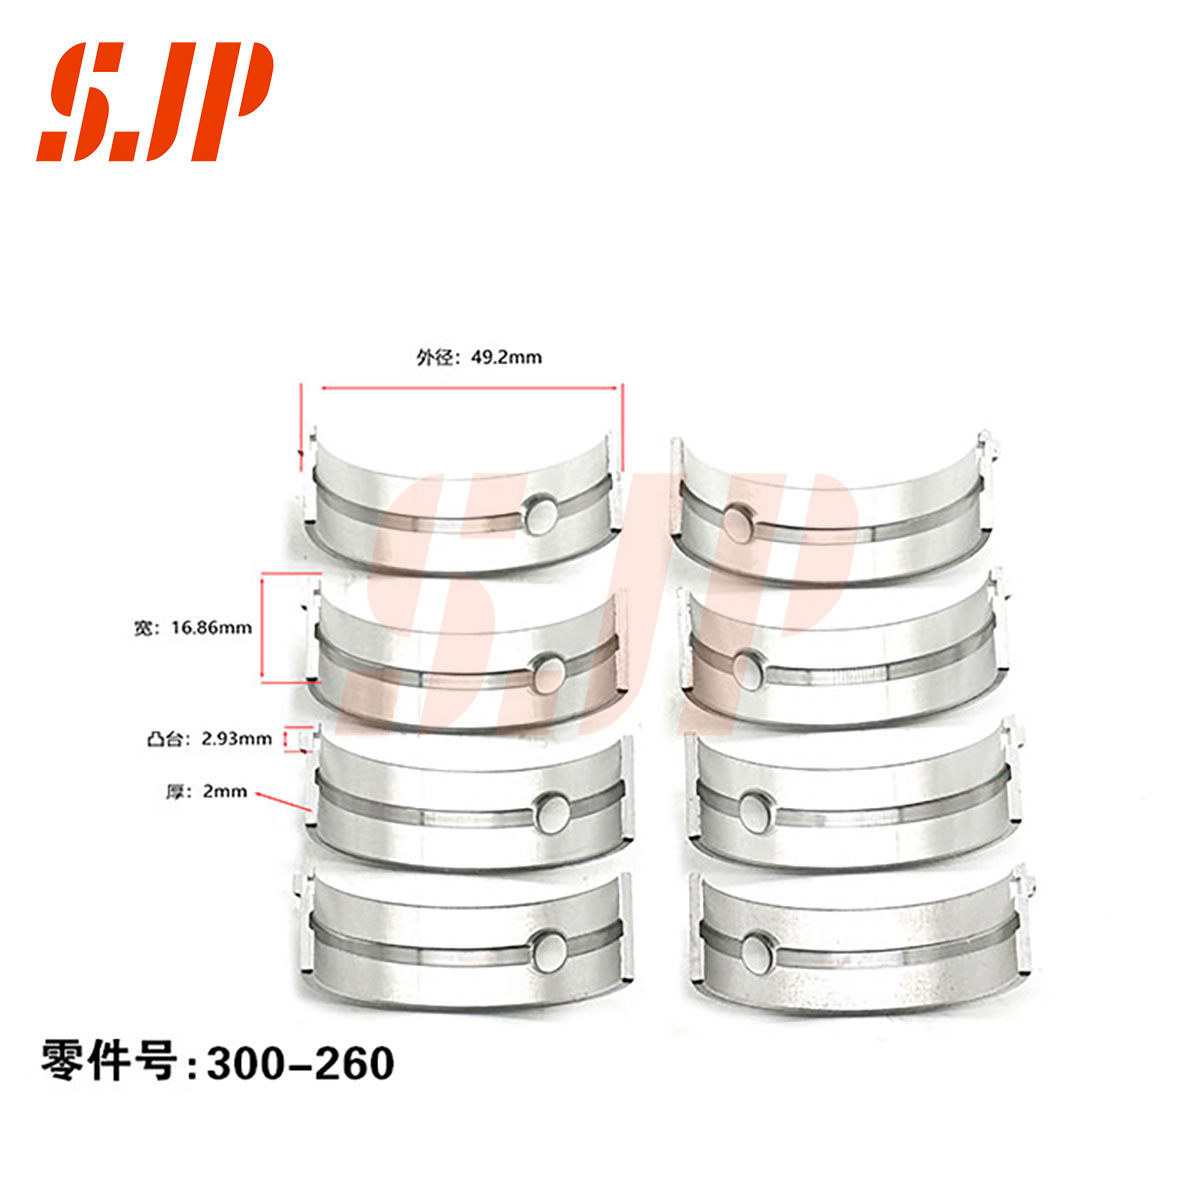 SJ-300-260 Main Bearing Set For Chevrolet Spark 0.8(Three cylinders)